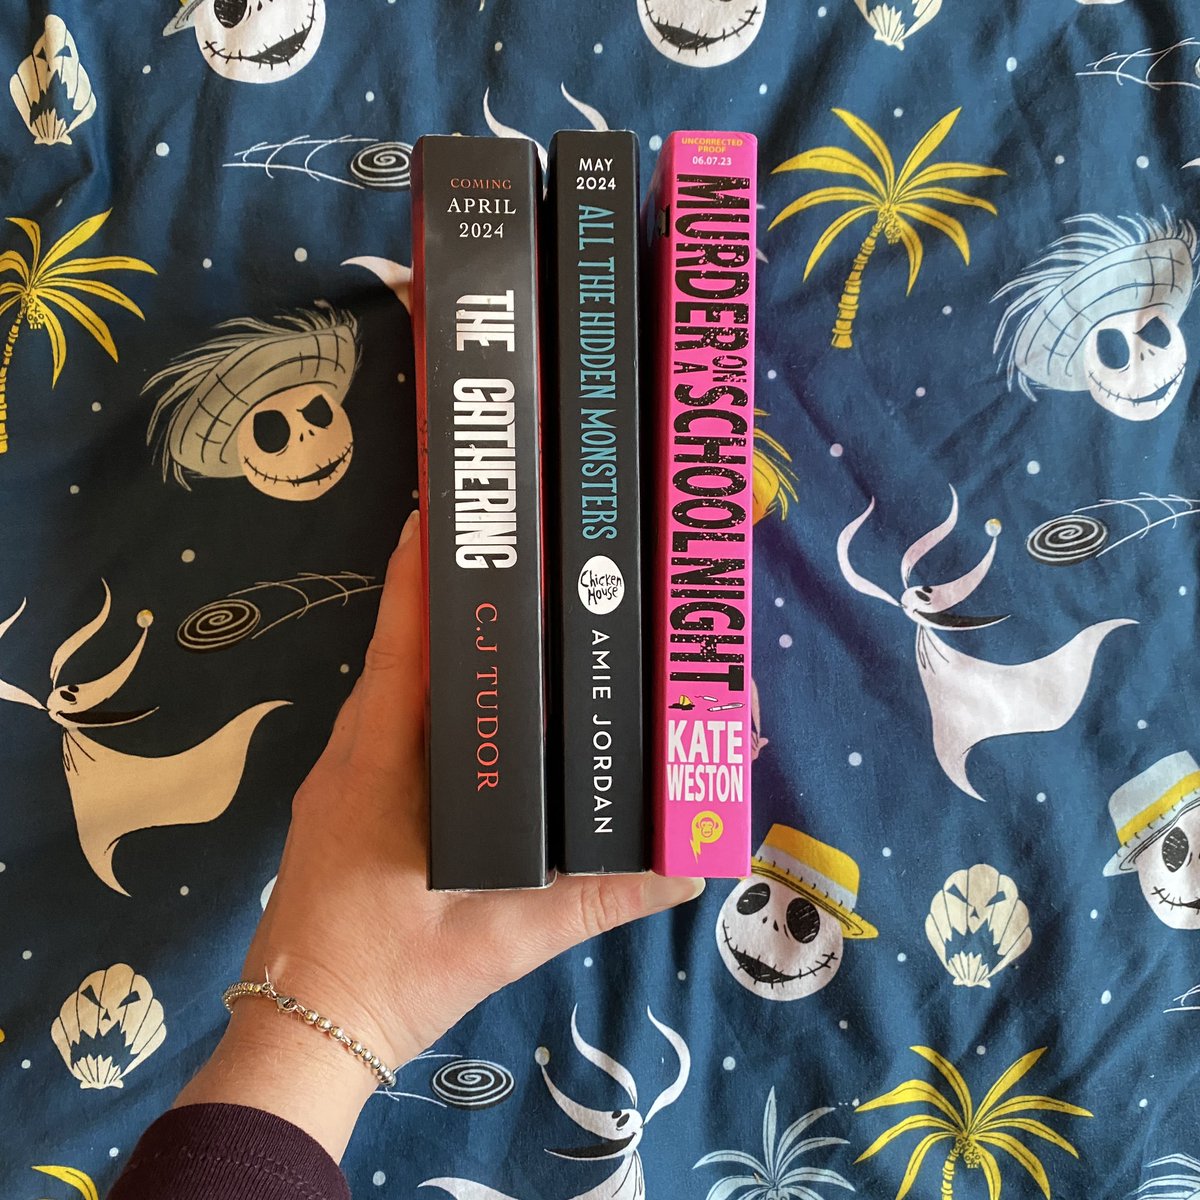 I’ve read some amazing books in 2023, and these are some of my favourite books of the year: mostly thrillers and horror with some humour and romance.